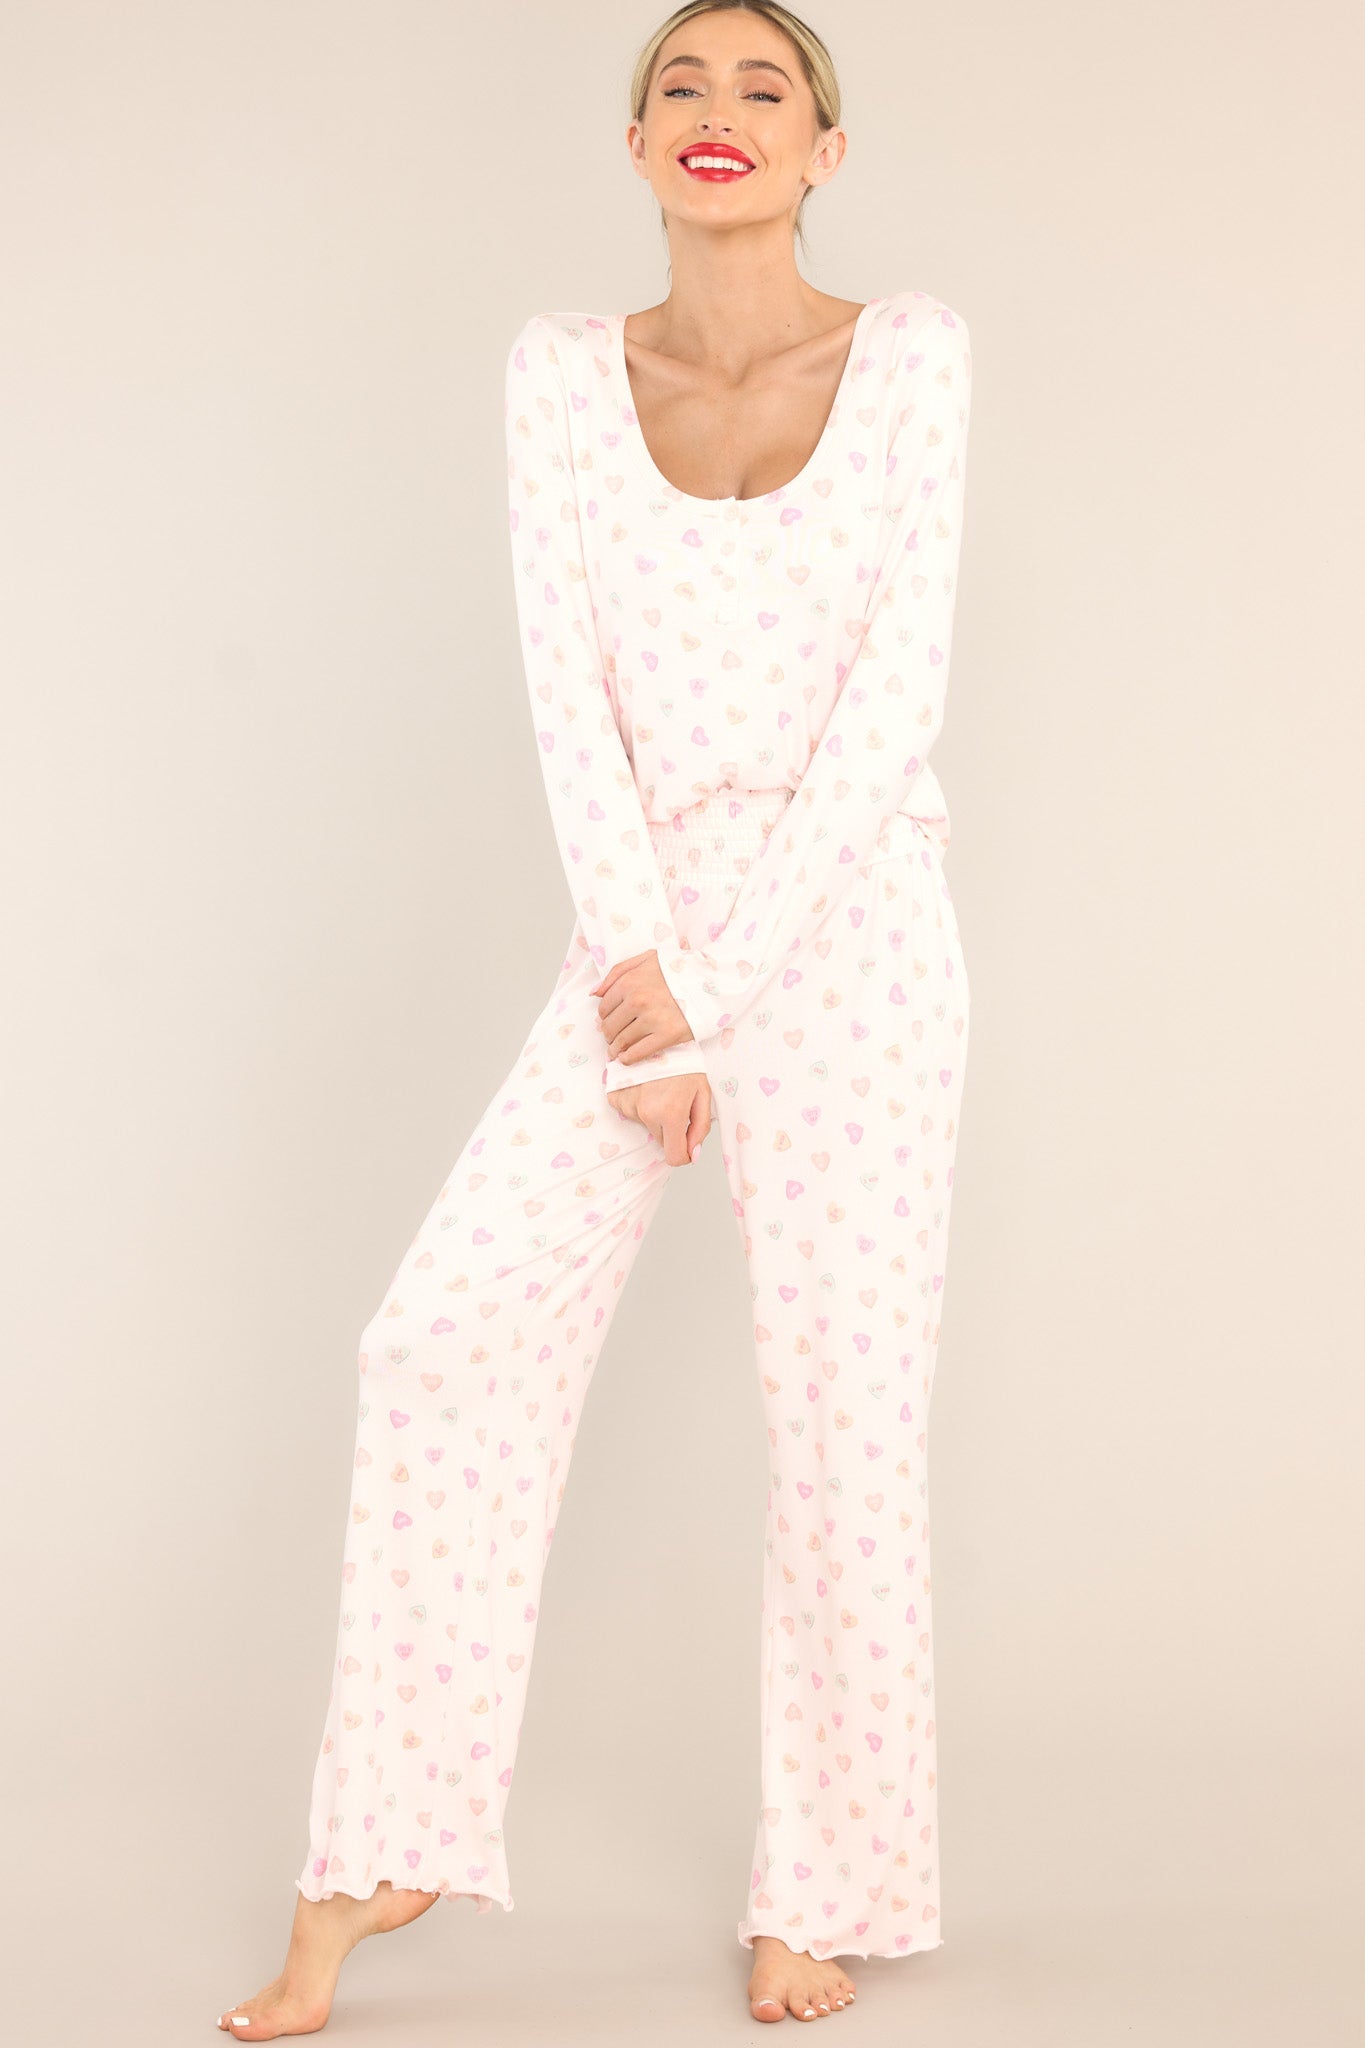 Full body view of these lounge pants that feature a fully smocked waistband, a festive print, and a super soft material.